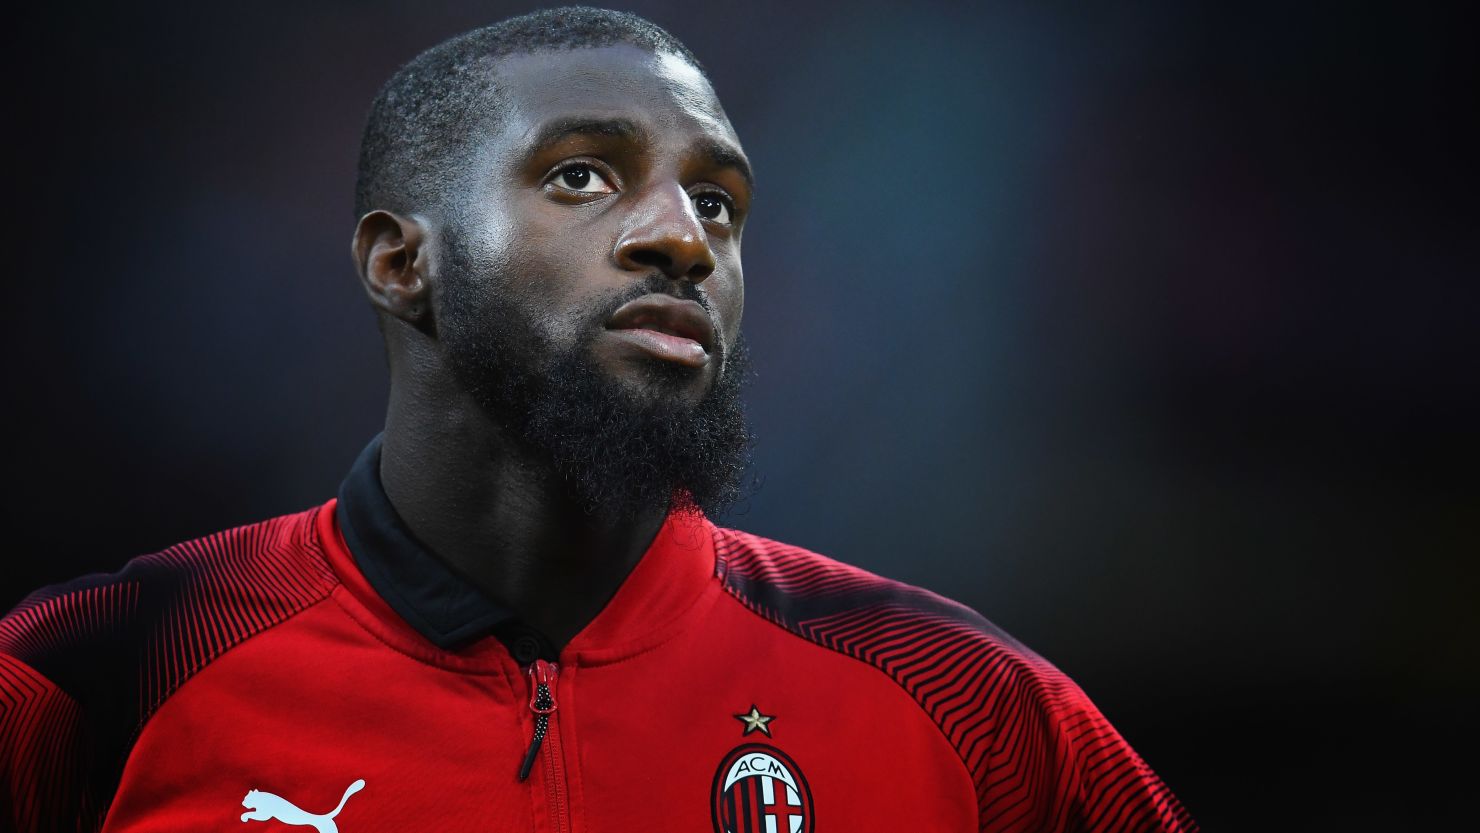 Tiémoué Bakayoko of AC Milan looks on during the Serie A match between AC Milan and US Sassuolo at Stadio Giuseppe Meazza